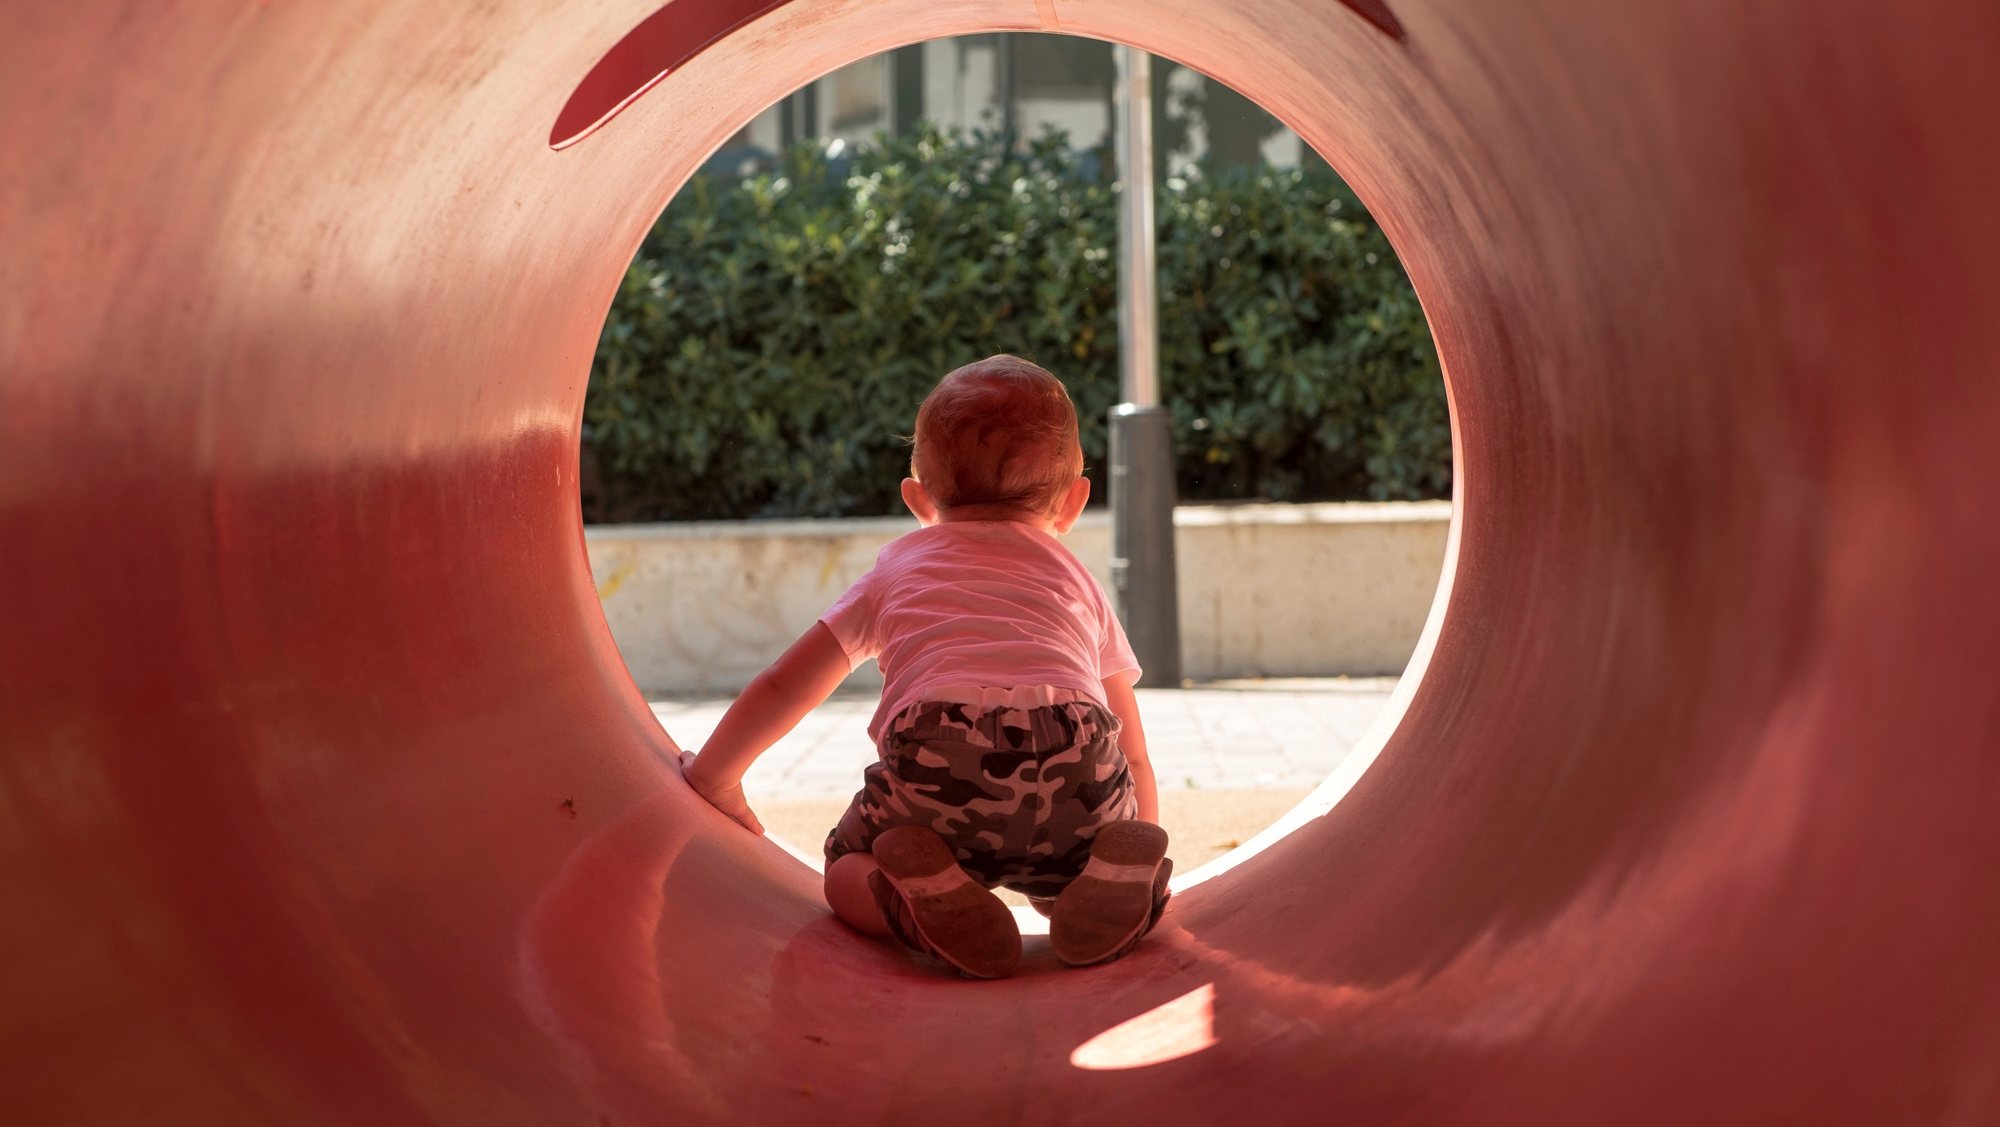 epa08501601 A little boy plays at a children&#039;s playground after its reopening in Palma de Mallorca, Majorca island, Spain, 22 June 2020. Playgrounds reopened in the city on 22 June after the state of emergency, implemented by the Spanish central government to stem the spread of the SARS-CoV-2 coronavirus that causes the COVID-19 disease, ended.  EPA/ATIENZA